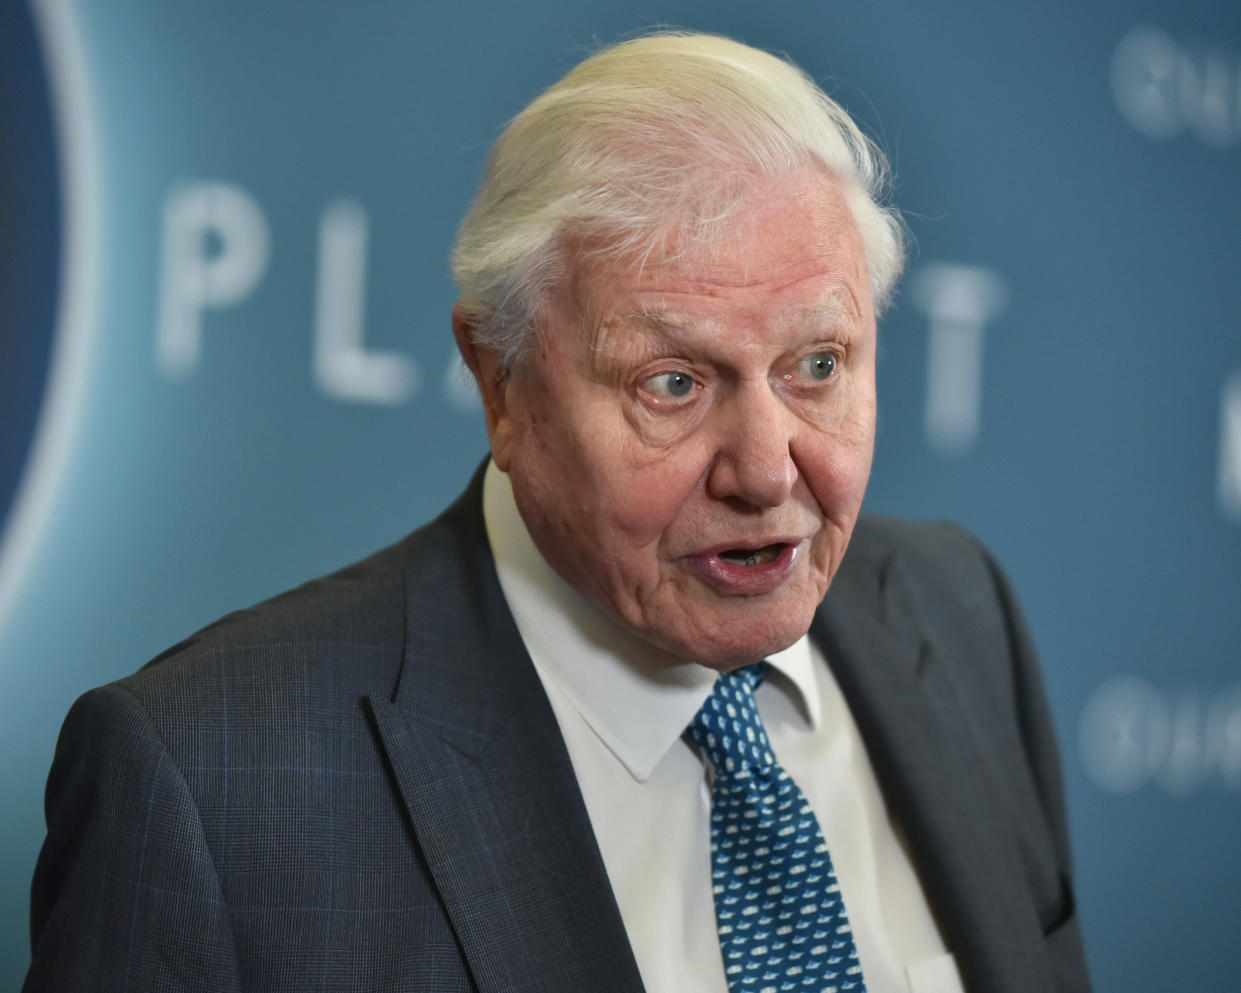 Sir David Attenborough warns of ‘man-made disaster on global scale’ in climate change film